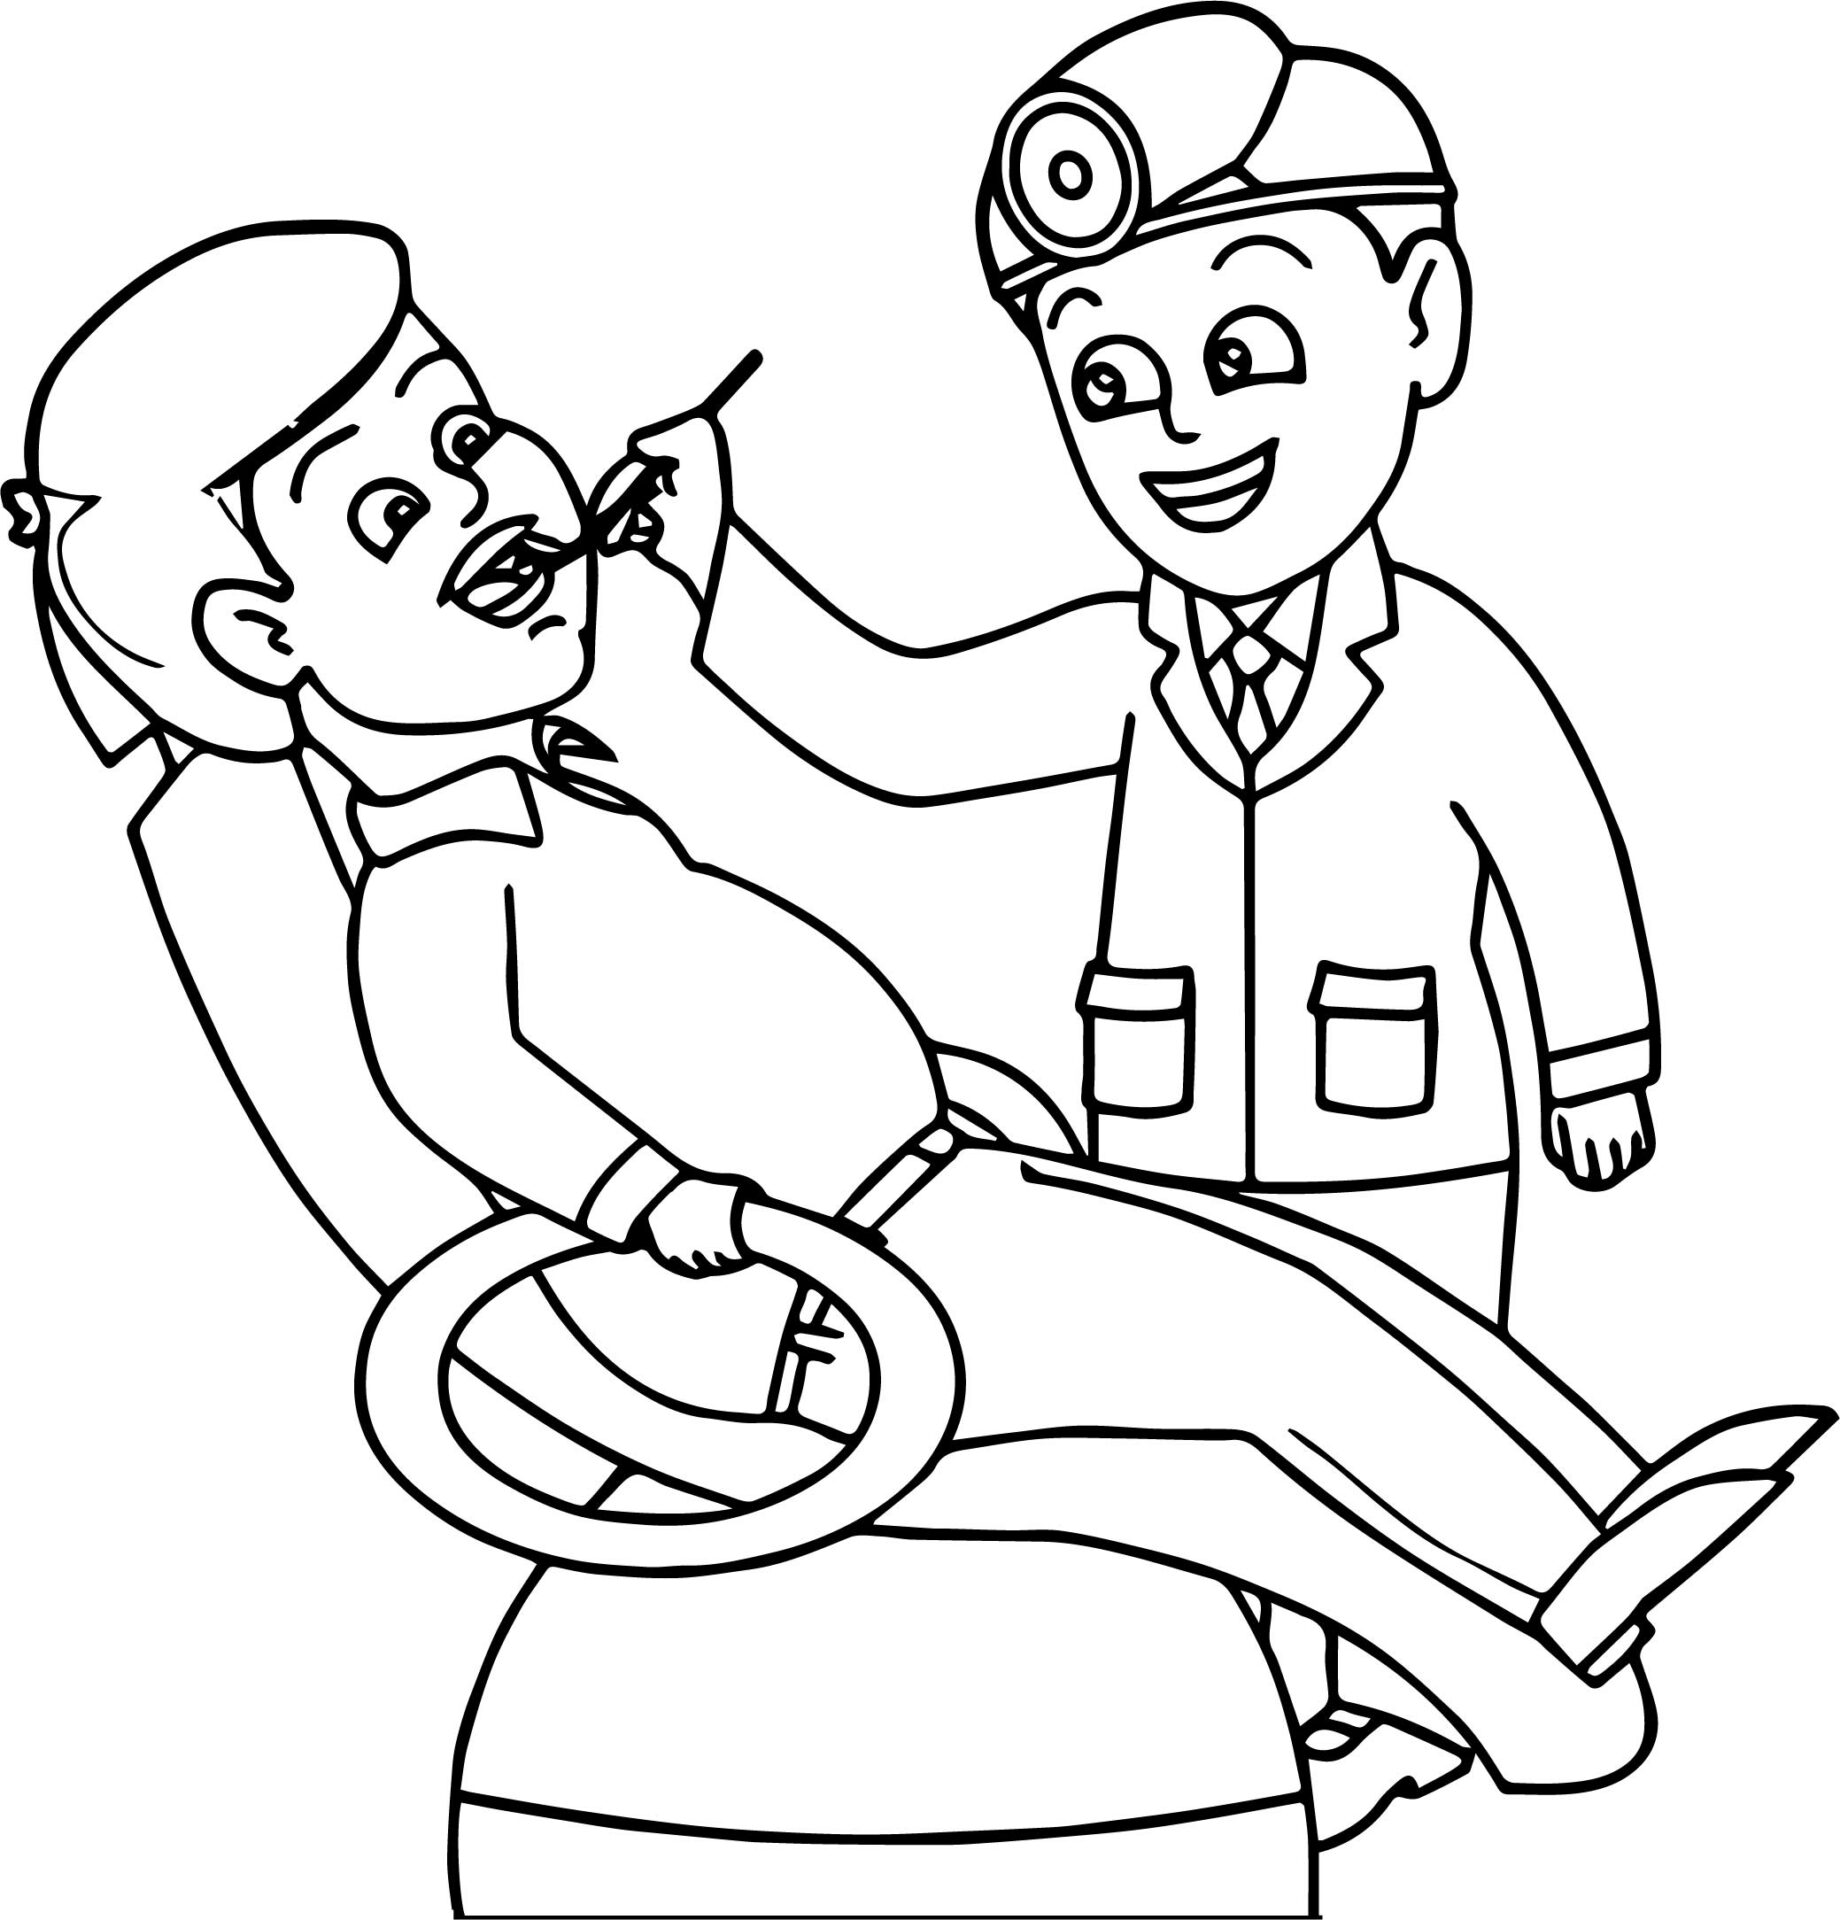 little-boy-dentist-coloring-page-free-printable-coloring-pages-for-kids